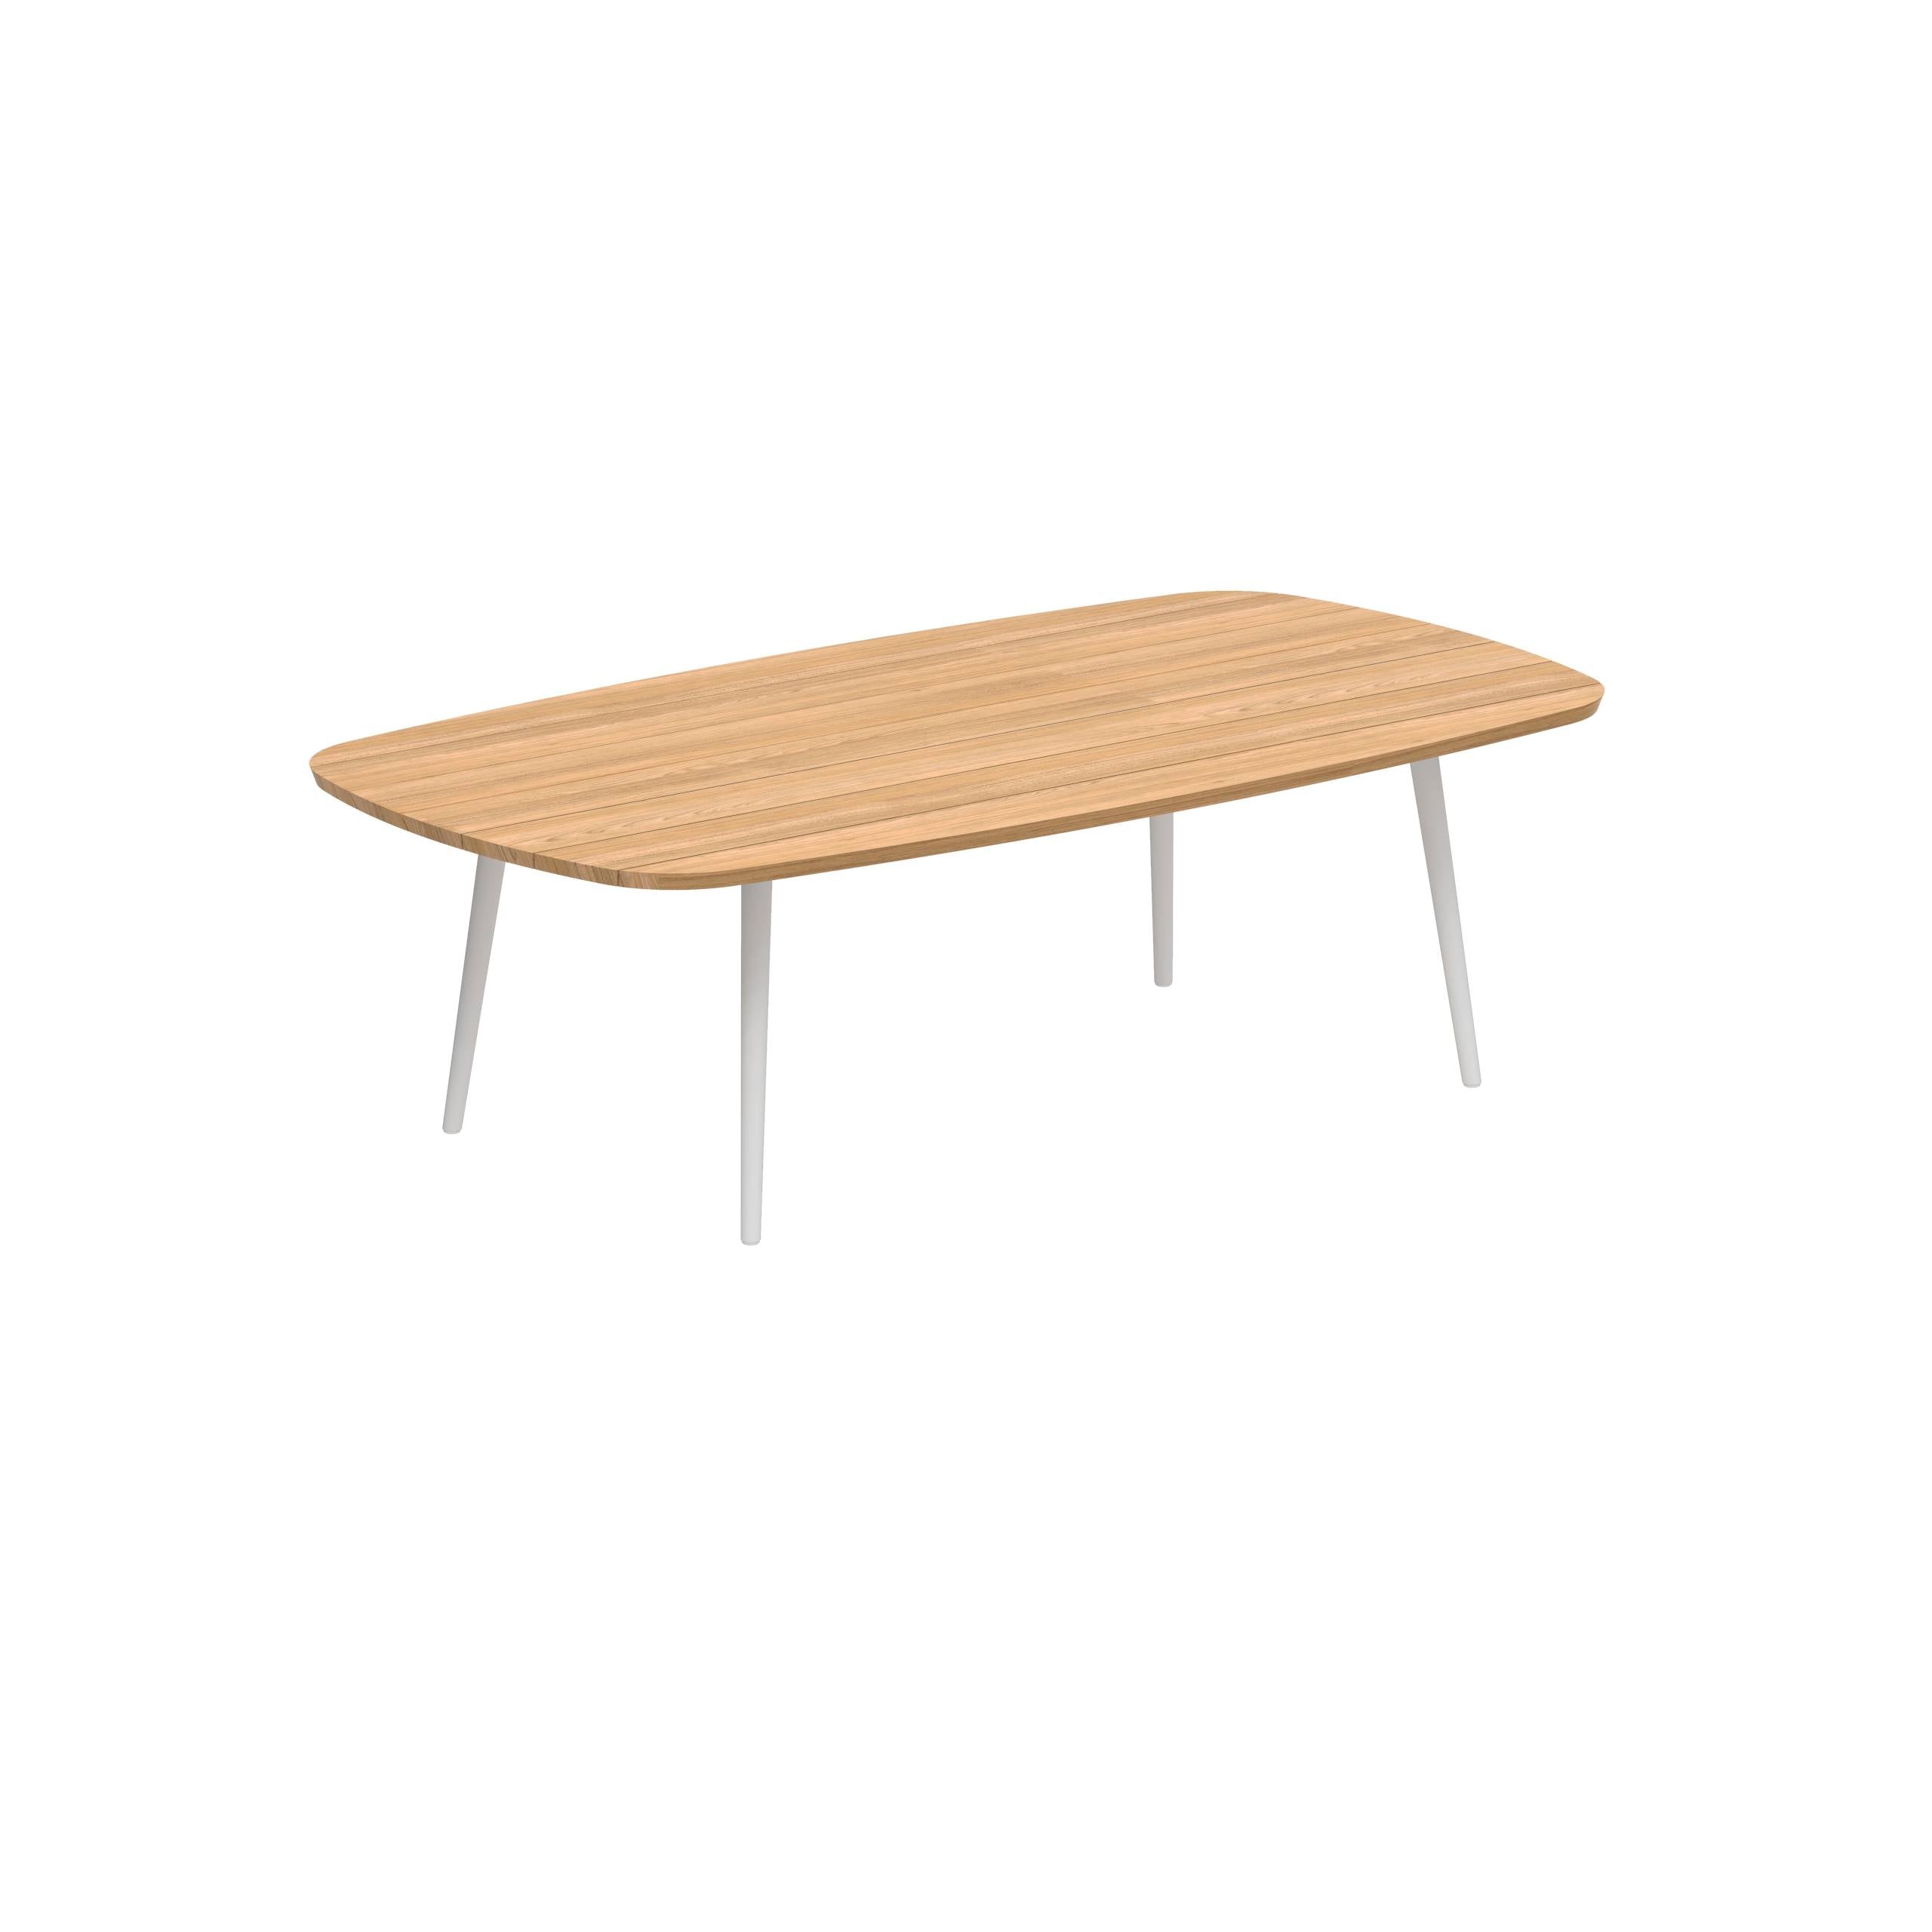 Styletto Low Dining Table 220x120cm Alu Legs White Tabletop Teak